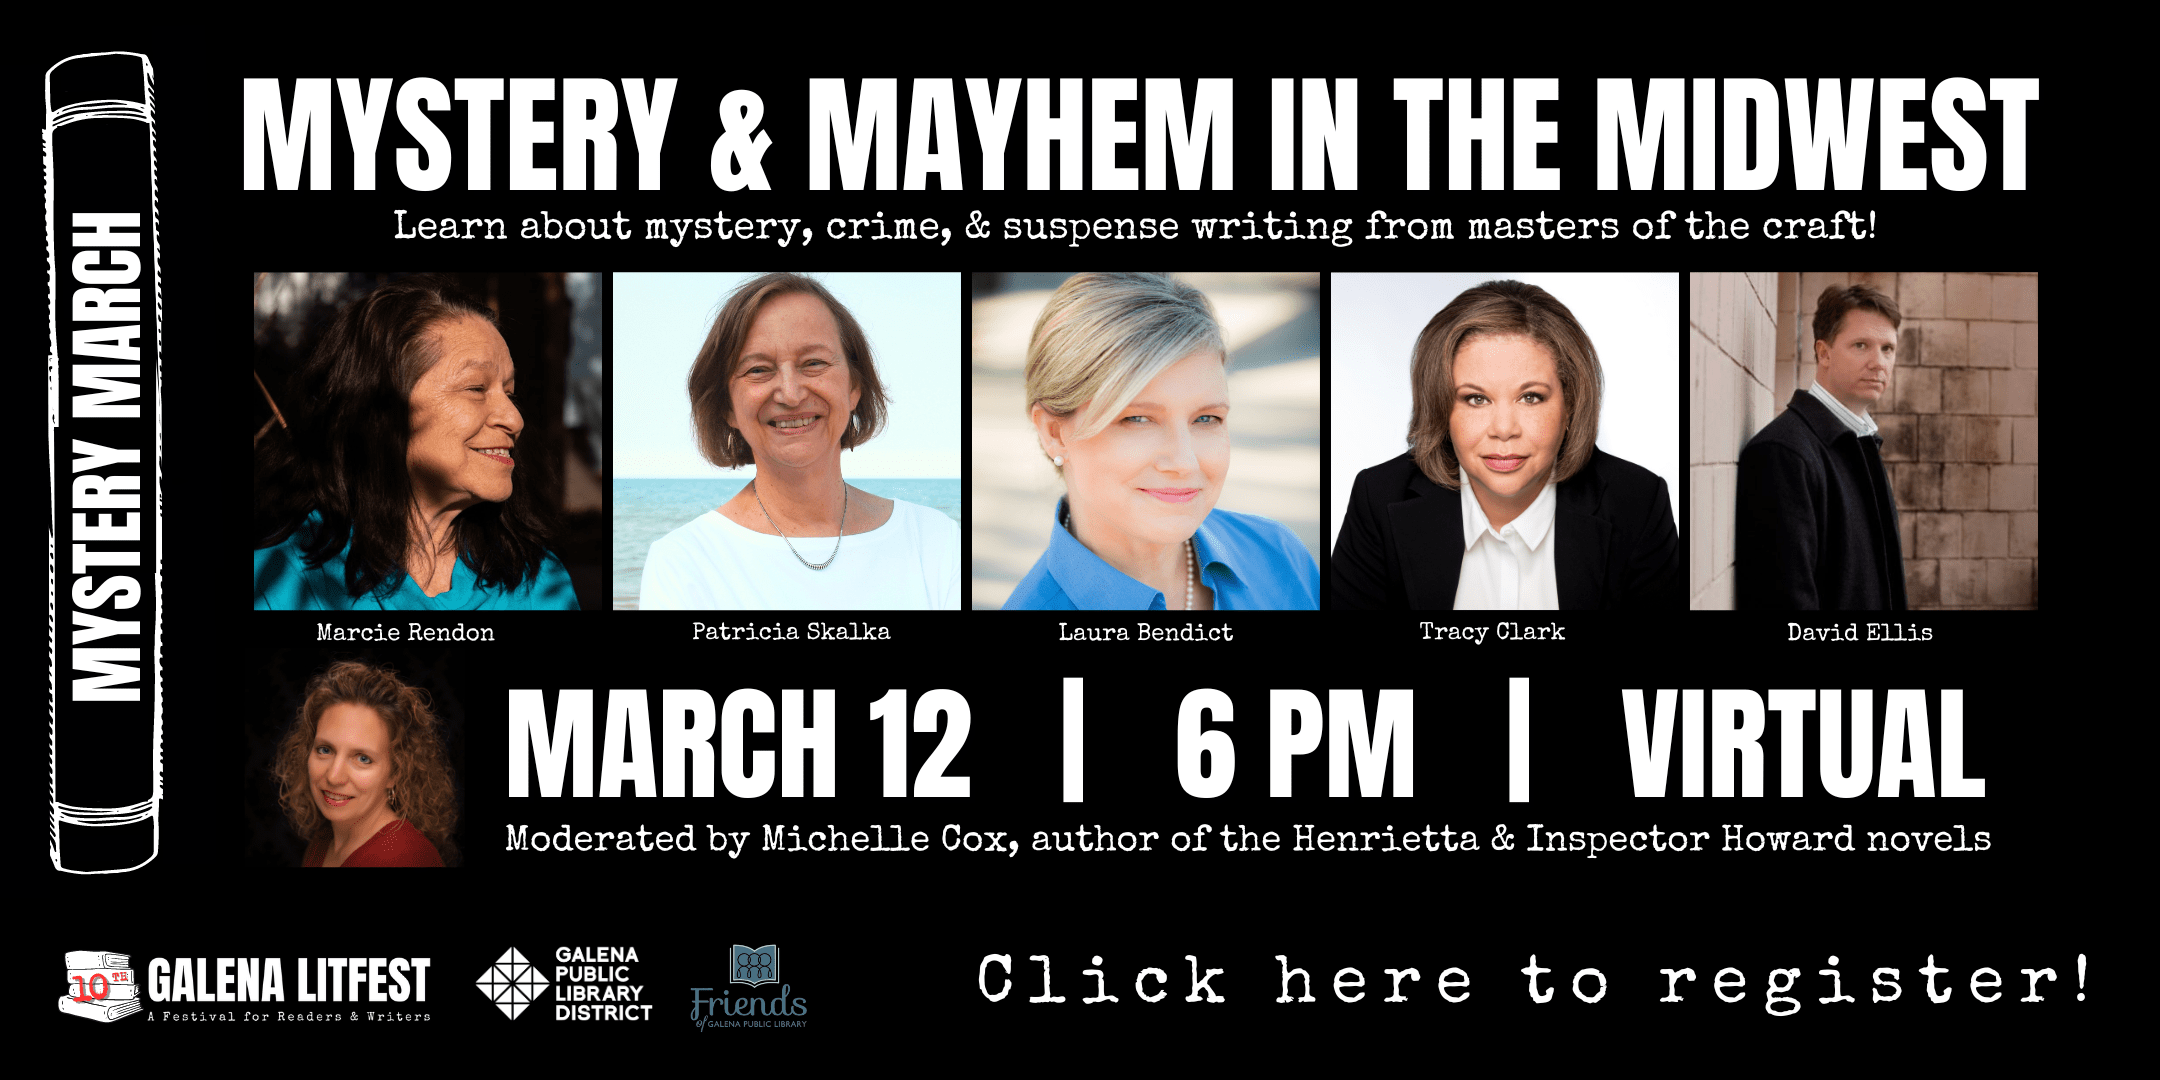 Mystery March. Mystery & Mayhem in the Midwest. Learn about mystery, crime and suspense writing from masters of the craft! Photos of Marcie Rendon, Patricia Skala, Laura Benedict, Tracy Clark and David Ellis. March 12 at 6pm. Virtual only. Moderated by Michelle Cox, author of the Henrietta and Inspector Howard Novels. Click to register.